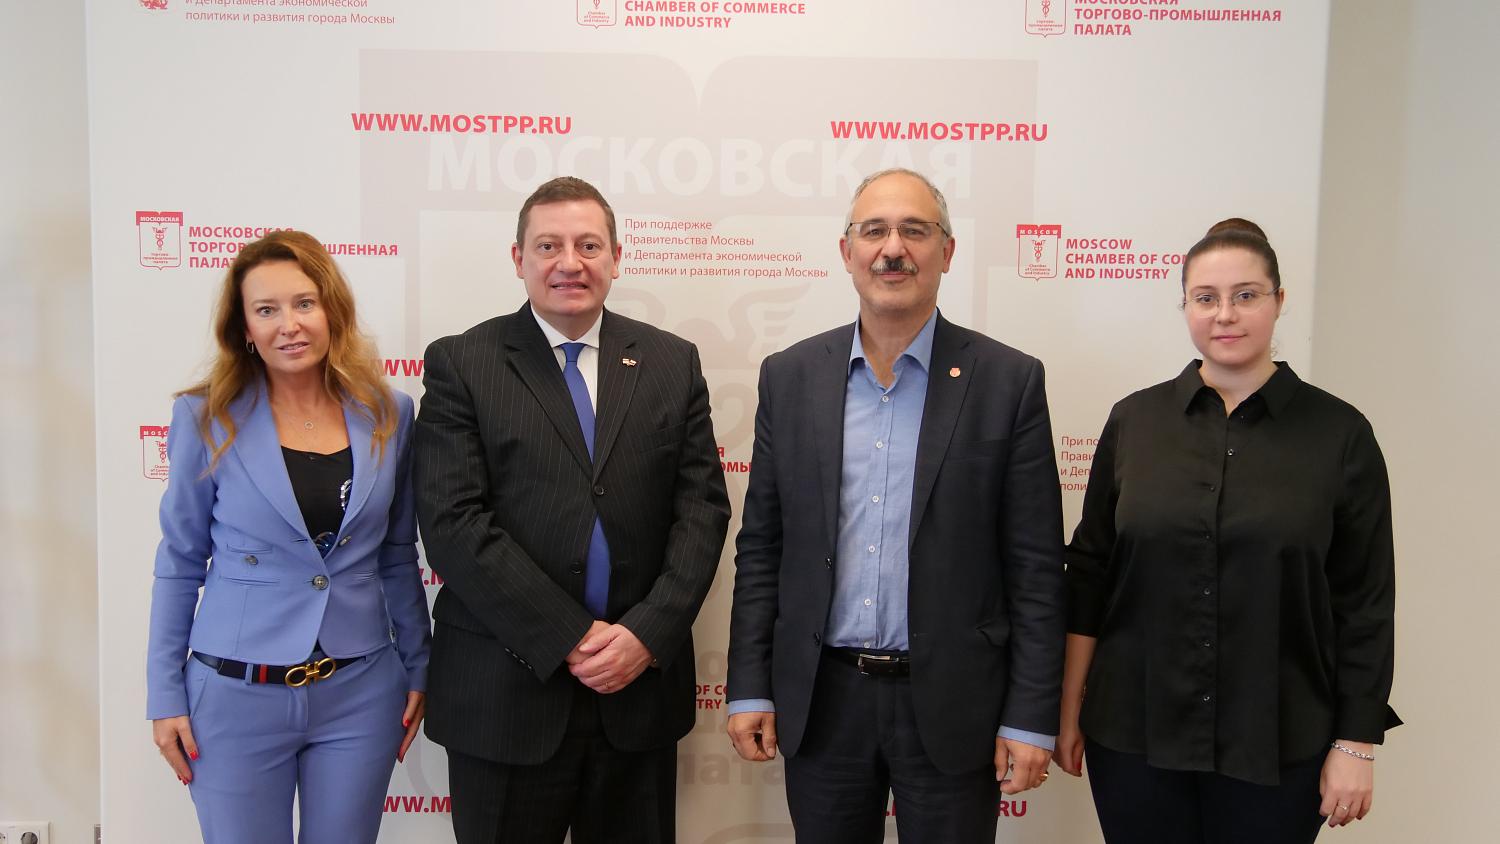 The Moscow Chamber of Commerce and Industry discussed the prospects for cooperation with the Principality of Monaco.